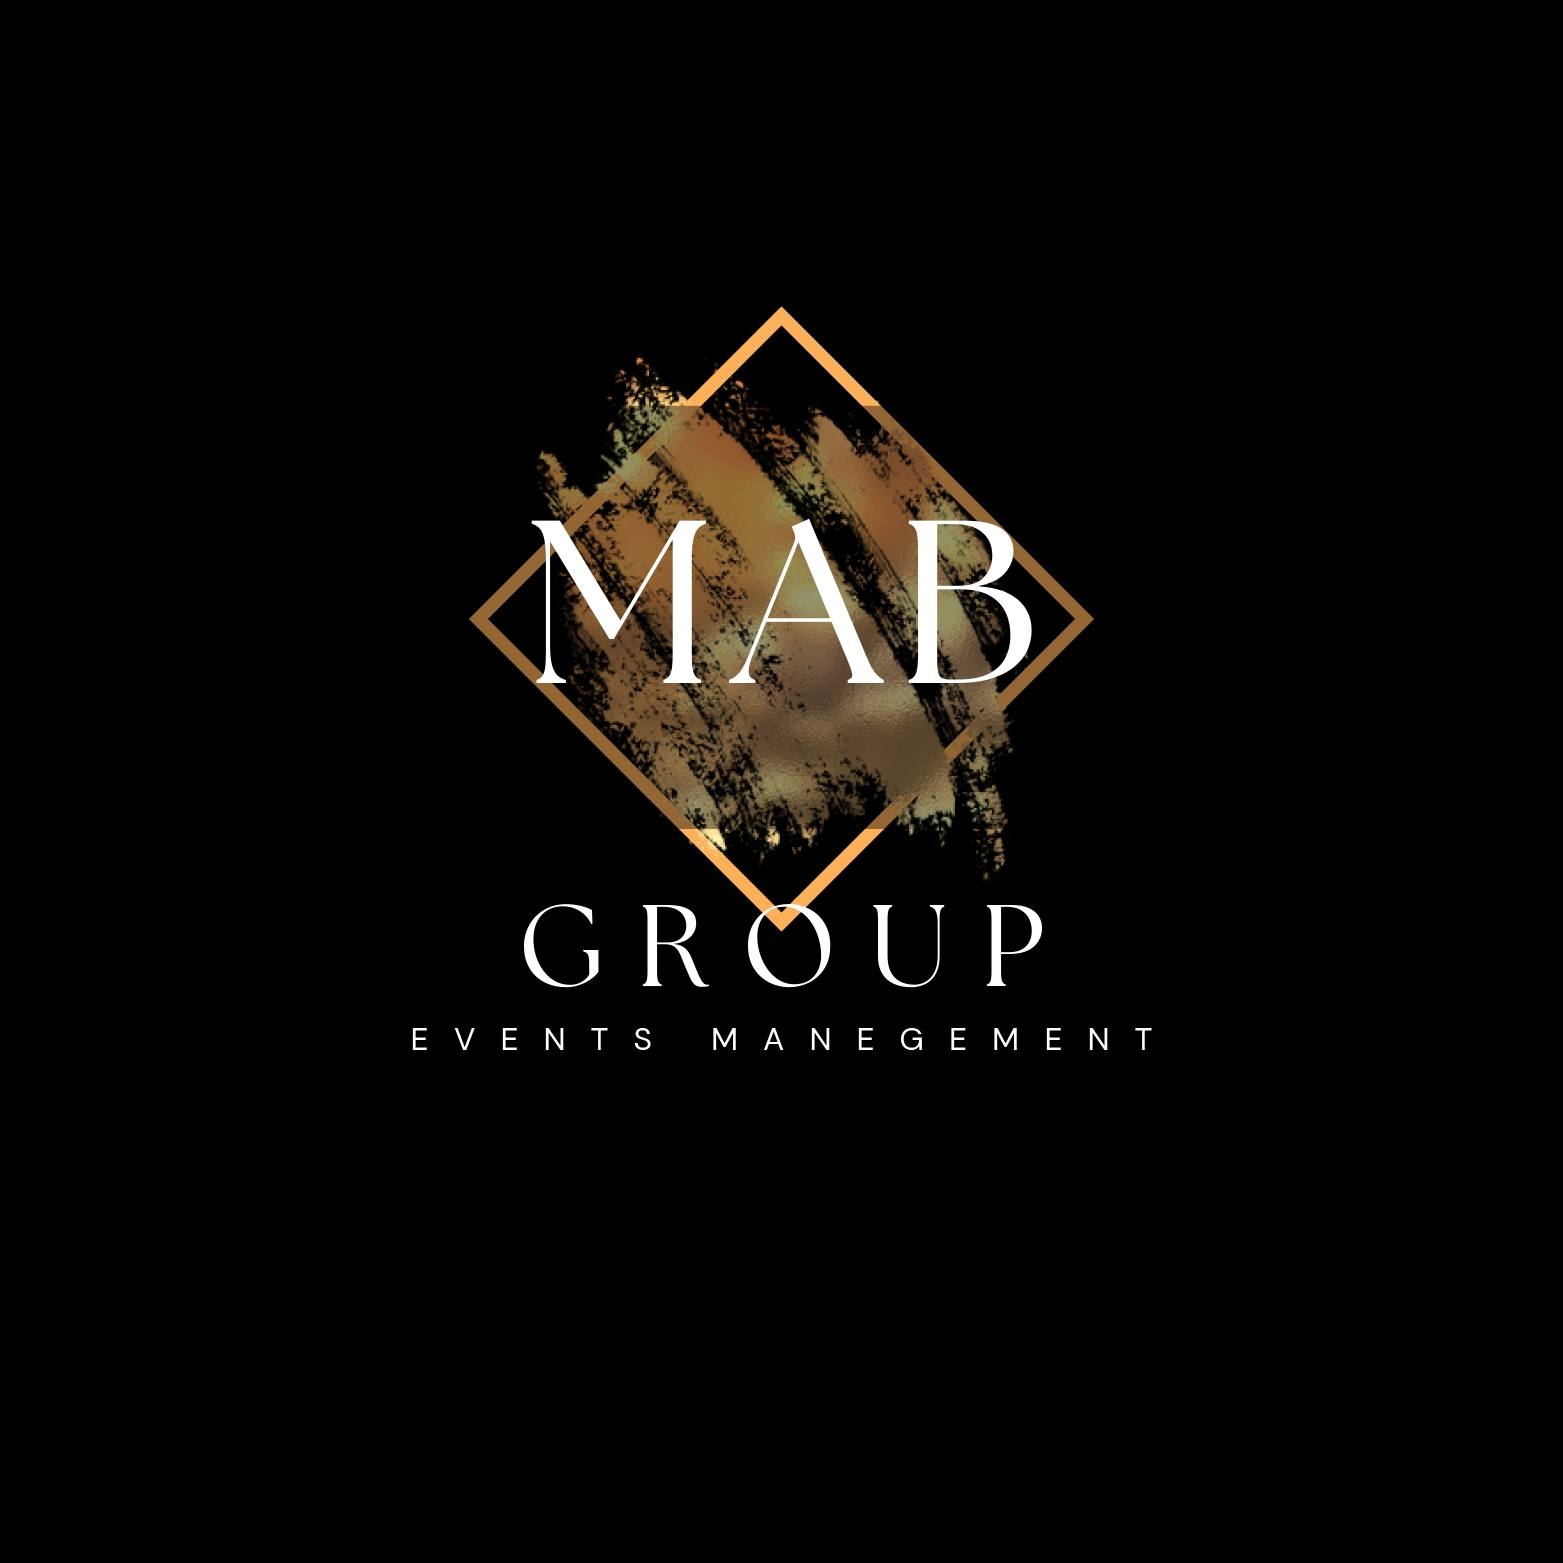 Mab Group Events